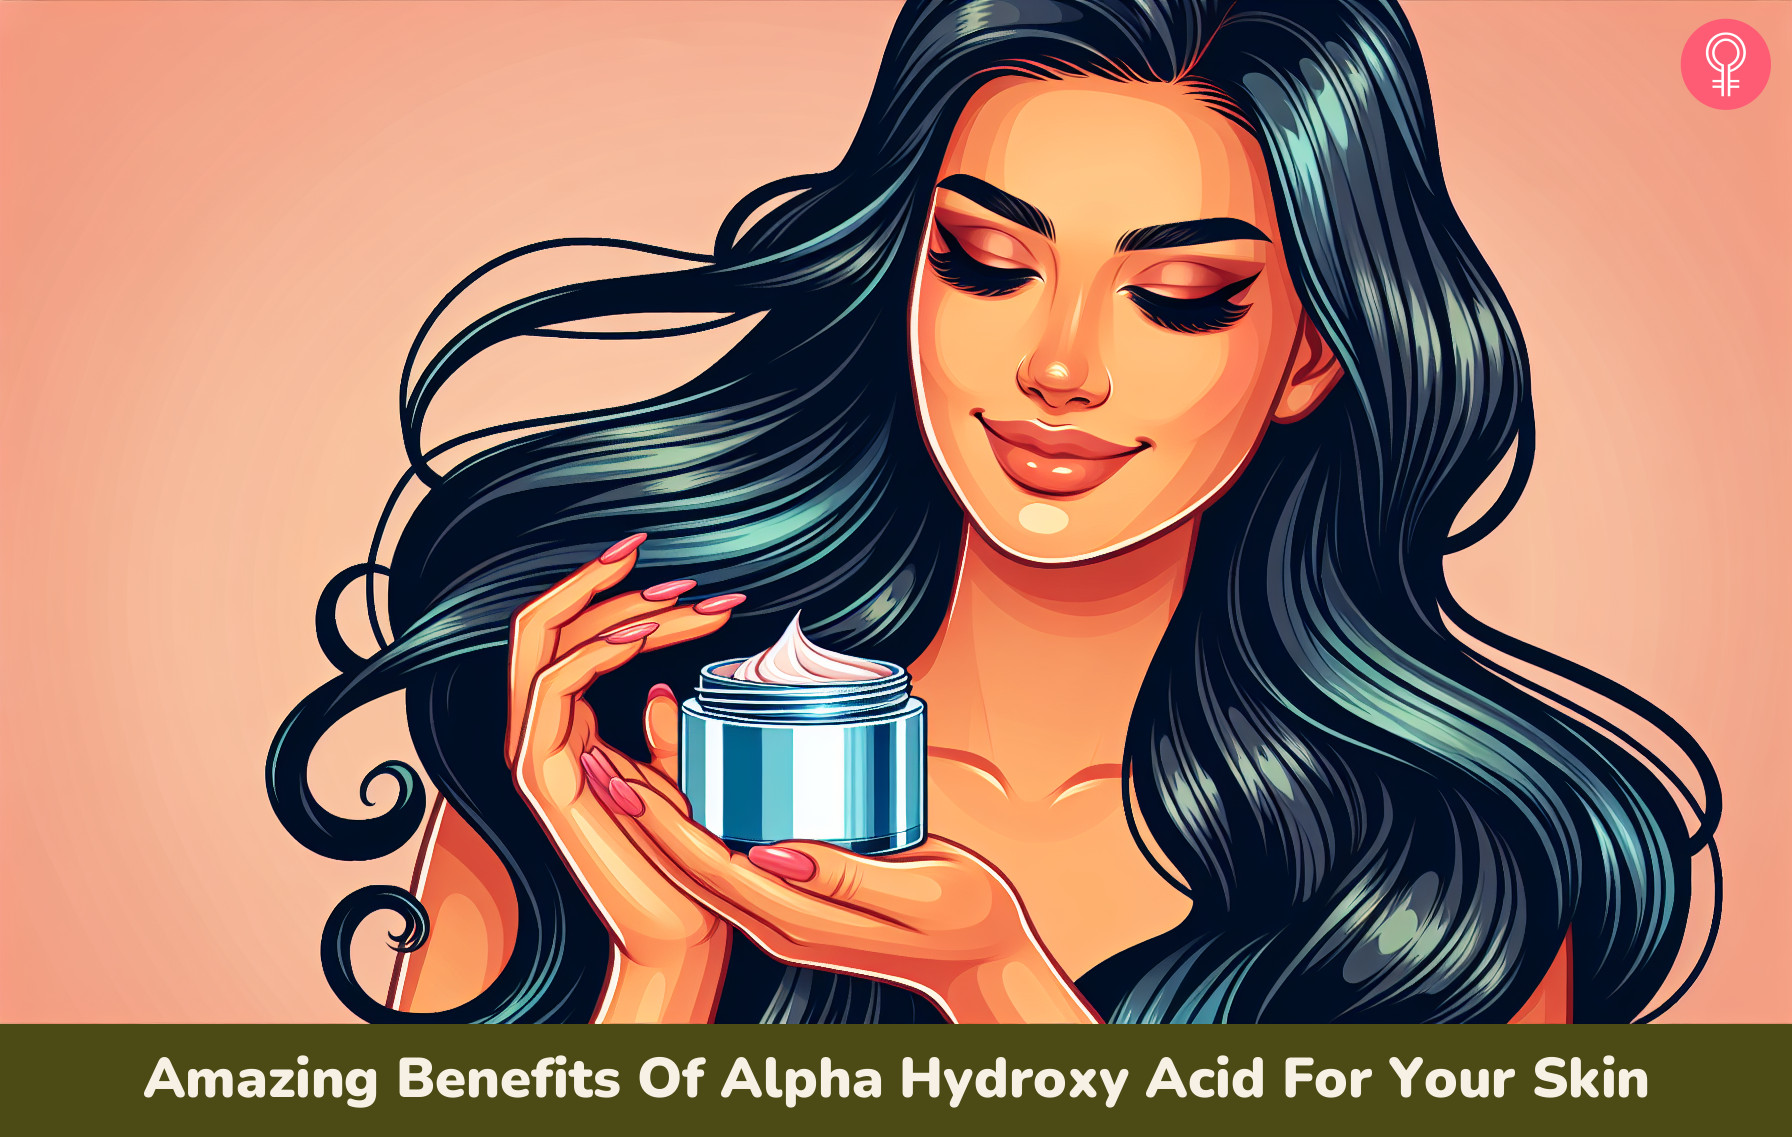 Benefits Of Alpha Hydroxy Acid For Your Skin